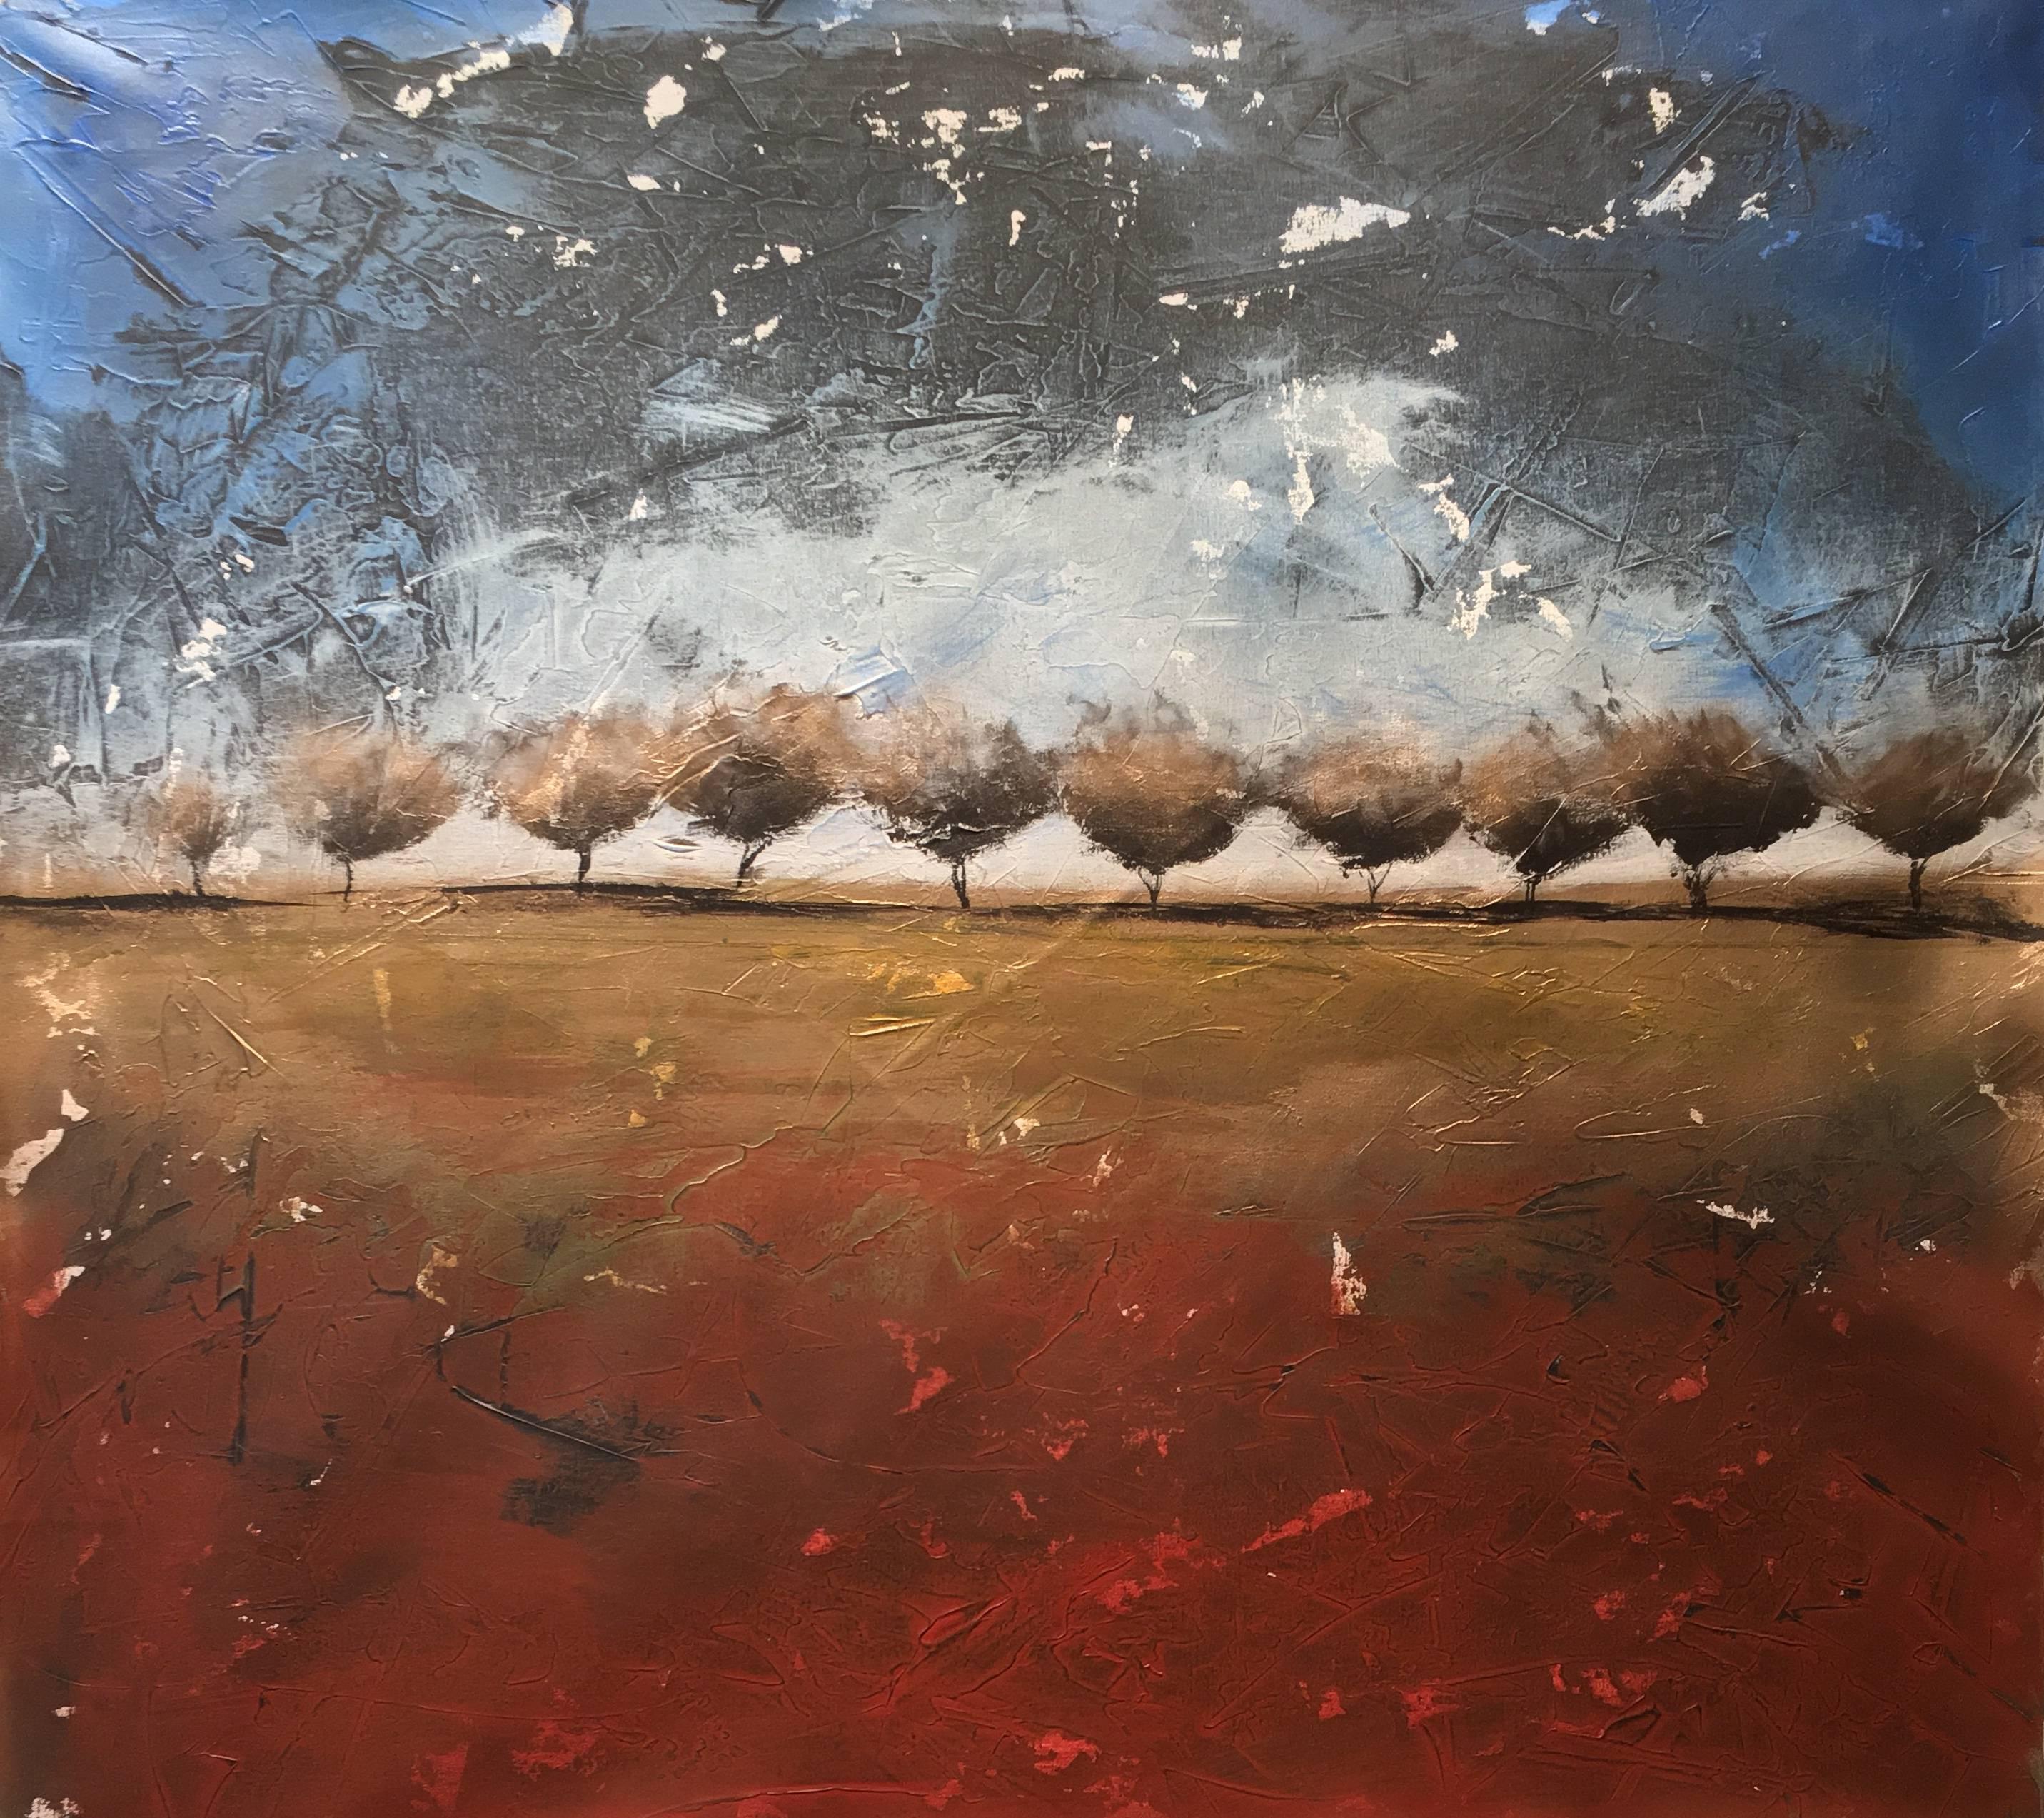 Contemporary landscape painting by artist, Shane Townley. Thick textured oil paintings on canvas. Great mid century style. Canvas comes fully stretched on 1 1/2in thick canvas, unframed and painted edges. Perfect piece for any collection.

Shane